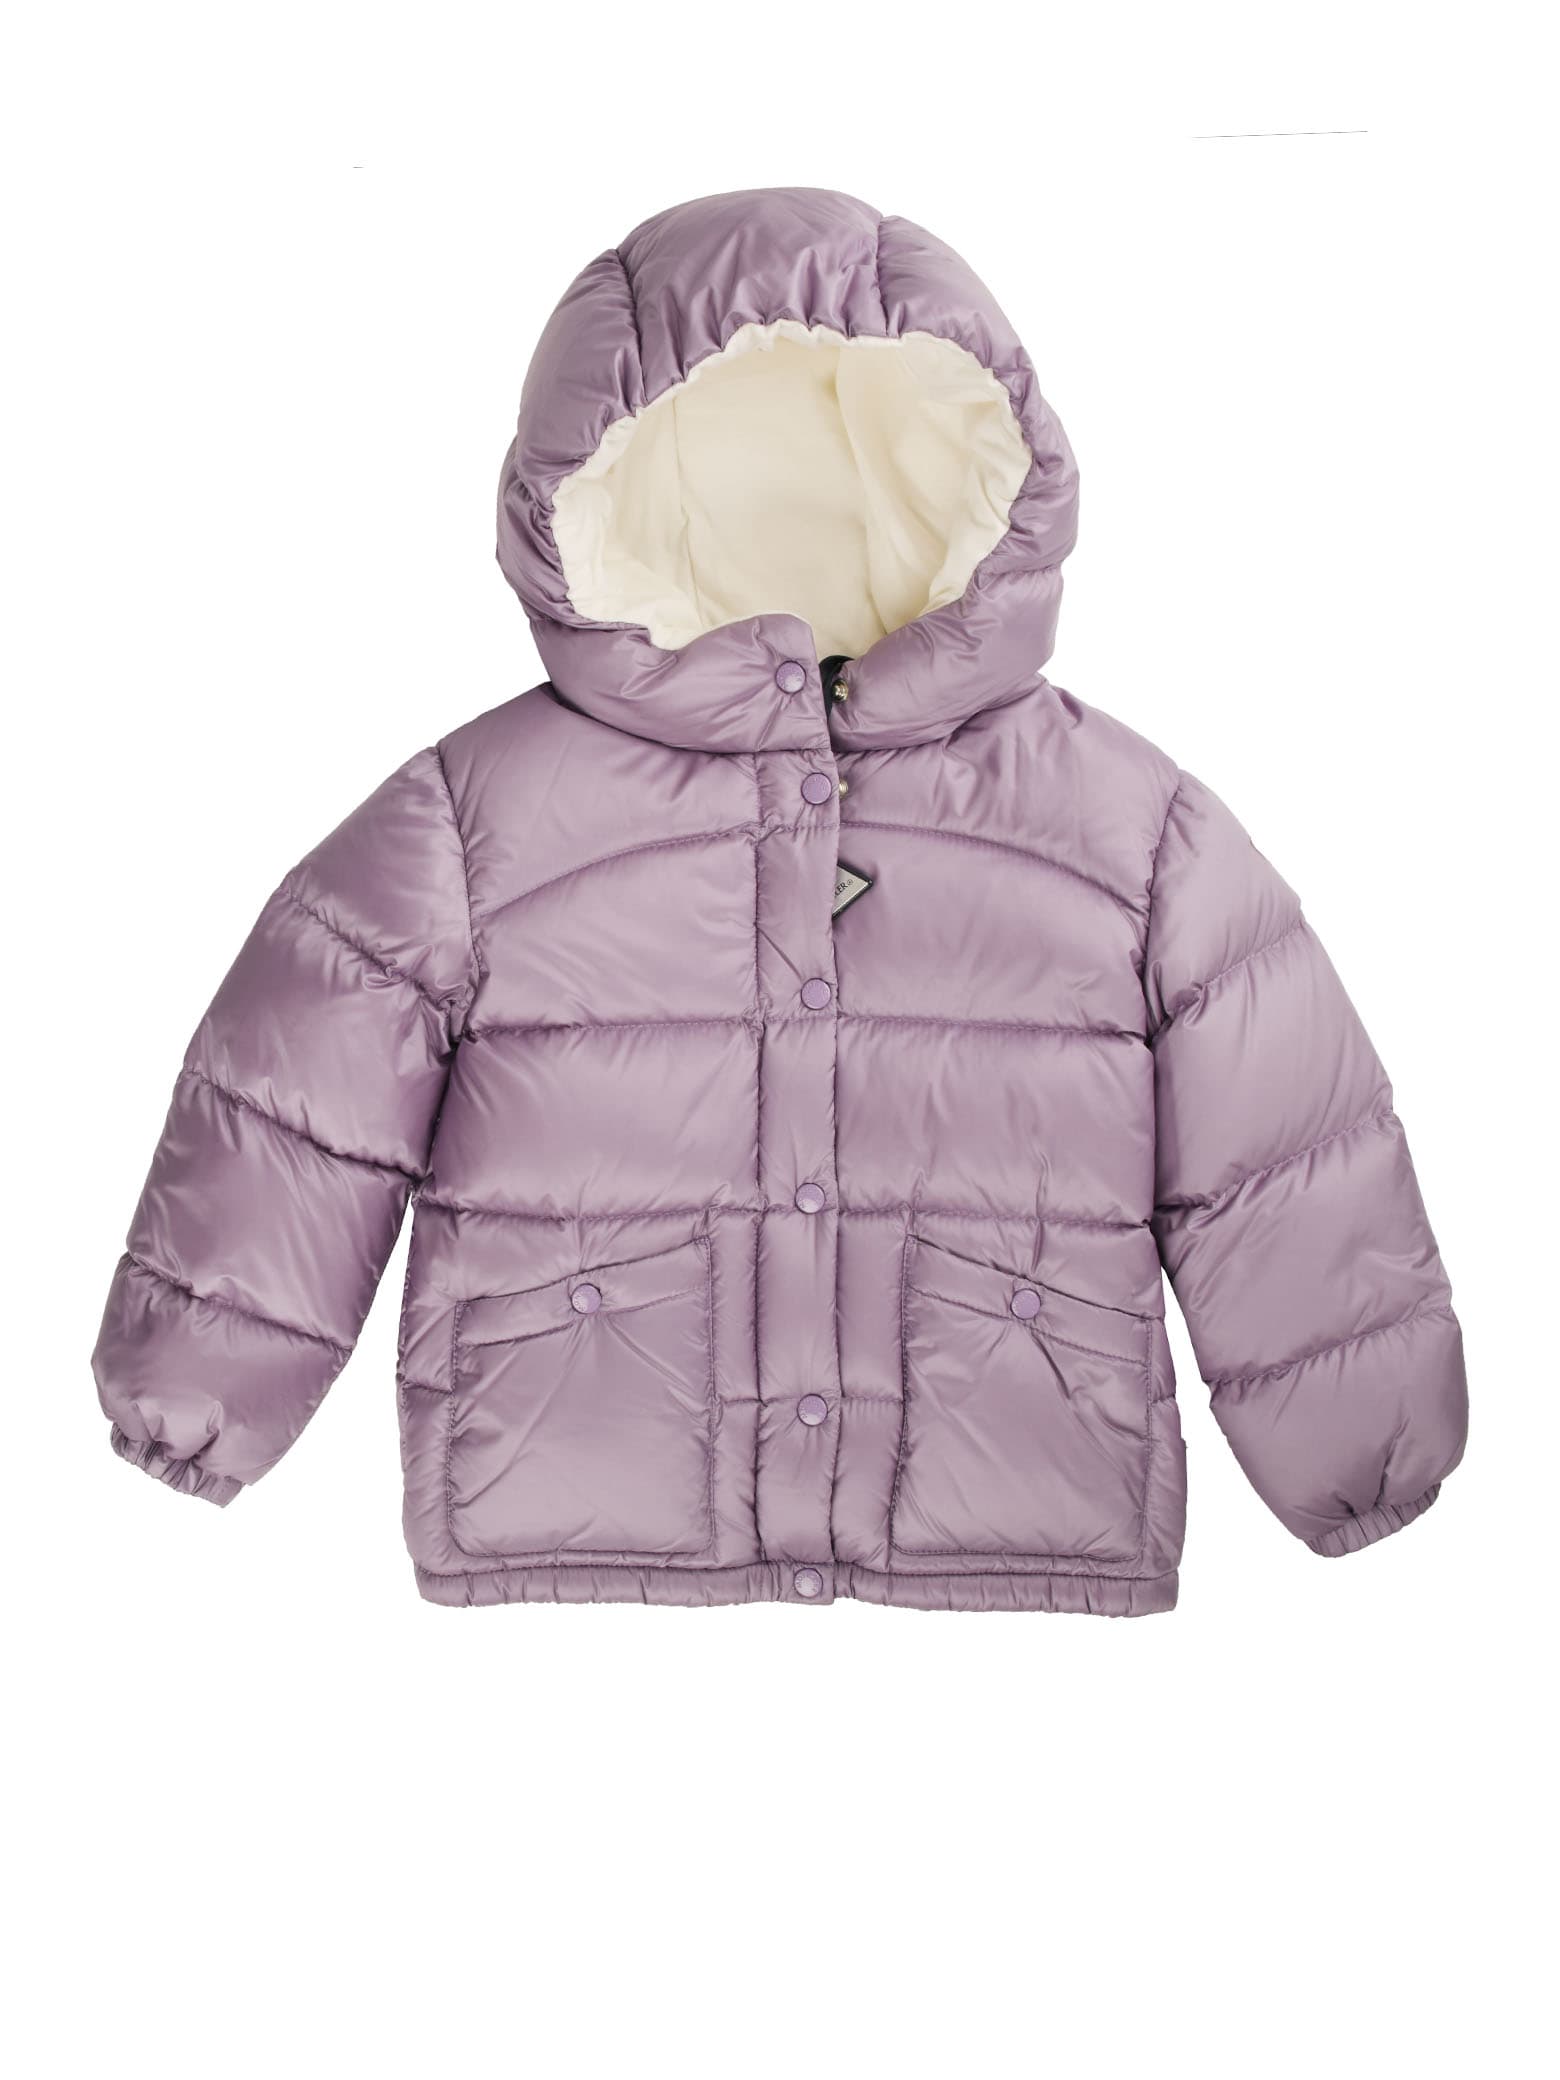 Moncler Lilac Jacket With White Internal Hood